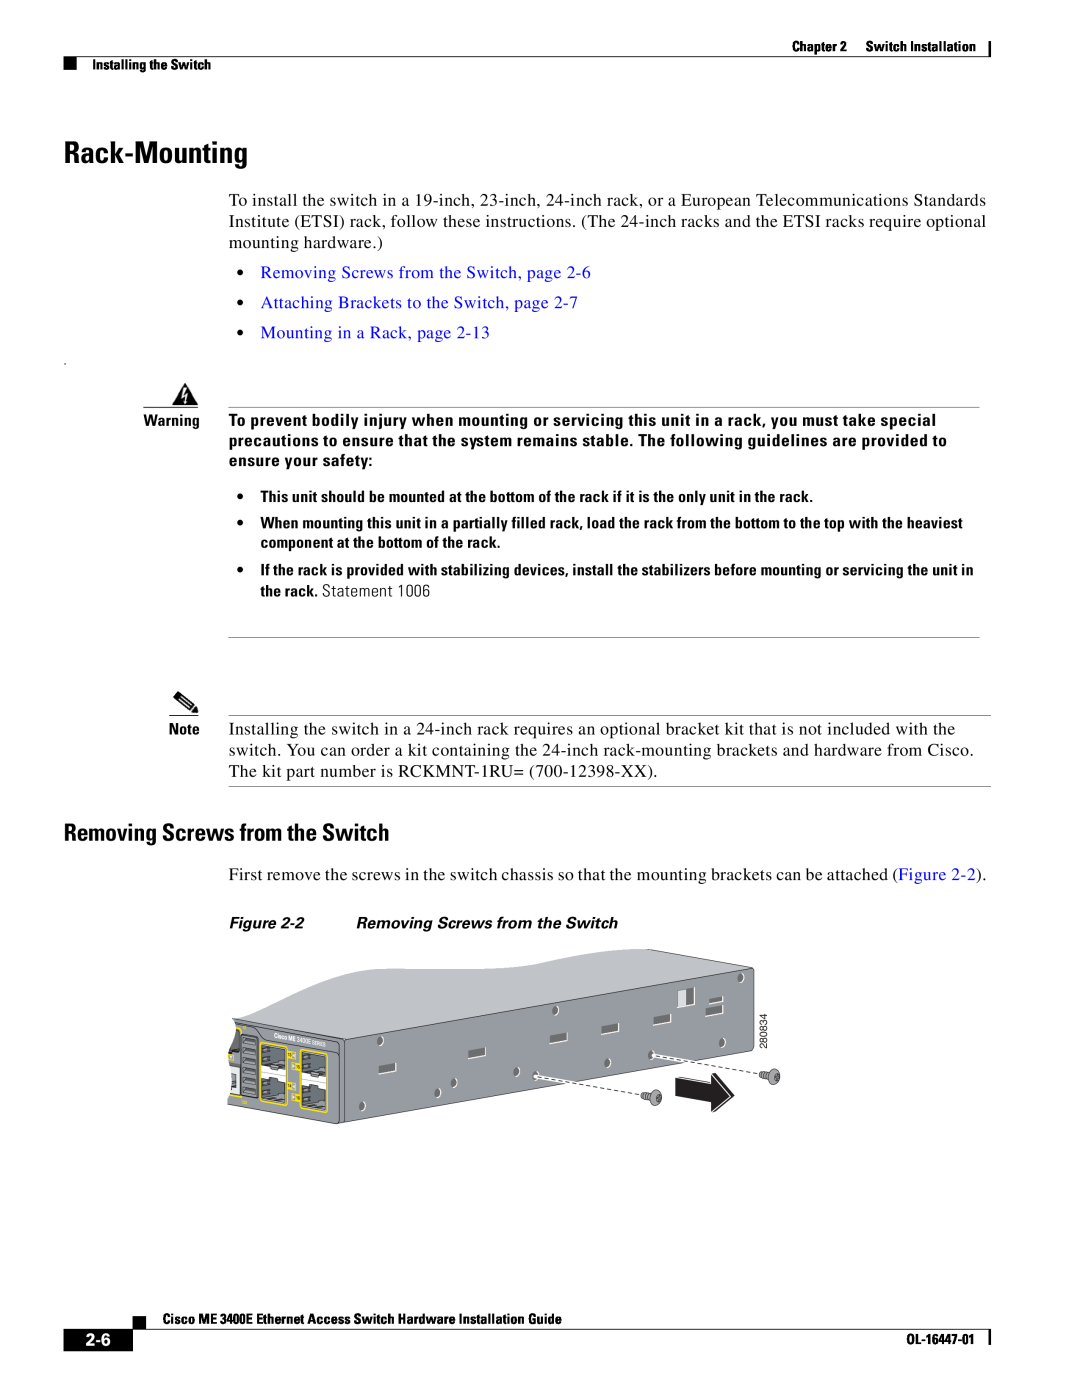 Cisco Systems OL-16447-01 manual Rack-Mounting, Removing Screws from the Switch, page 